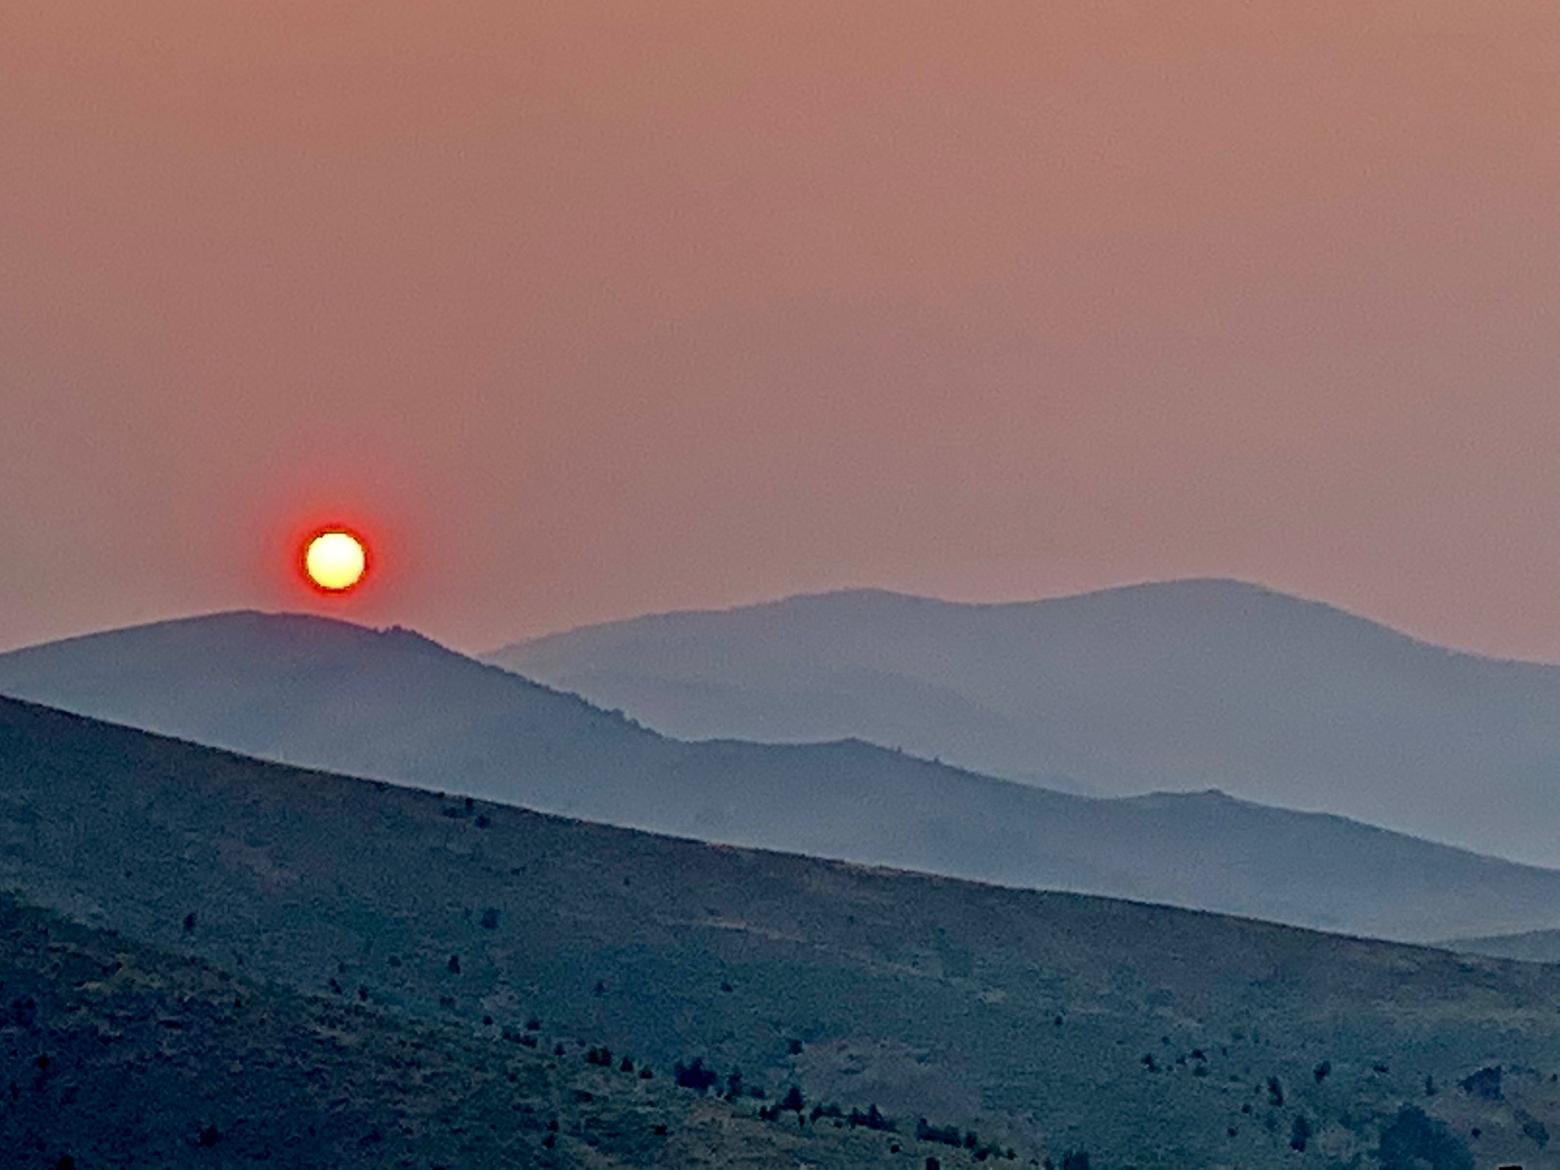 While smokey sunsets like this one falling below the Tobacco Roots west of Bozeman possess a strange beauty, the unhealthy air speaks to how ubiquitous the wildfire menace is even for people who do not live in the WUI. Photo by Todd Wilkinson